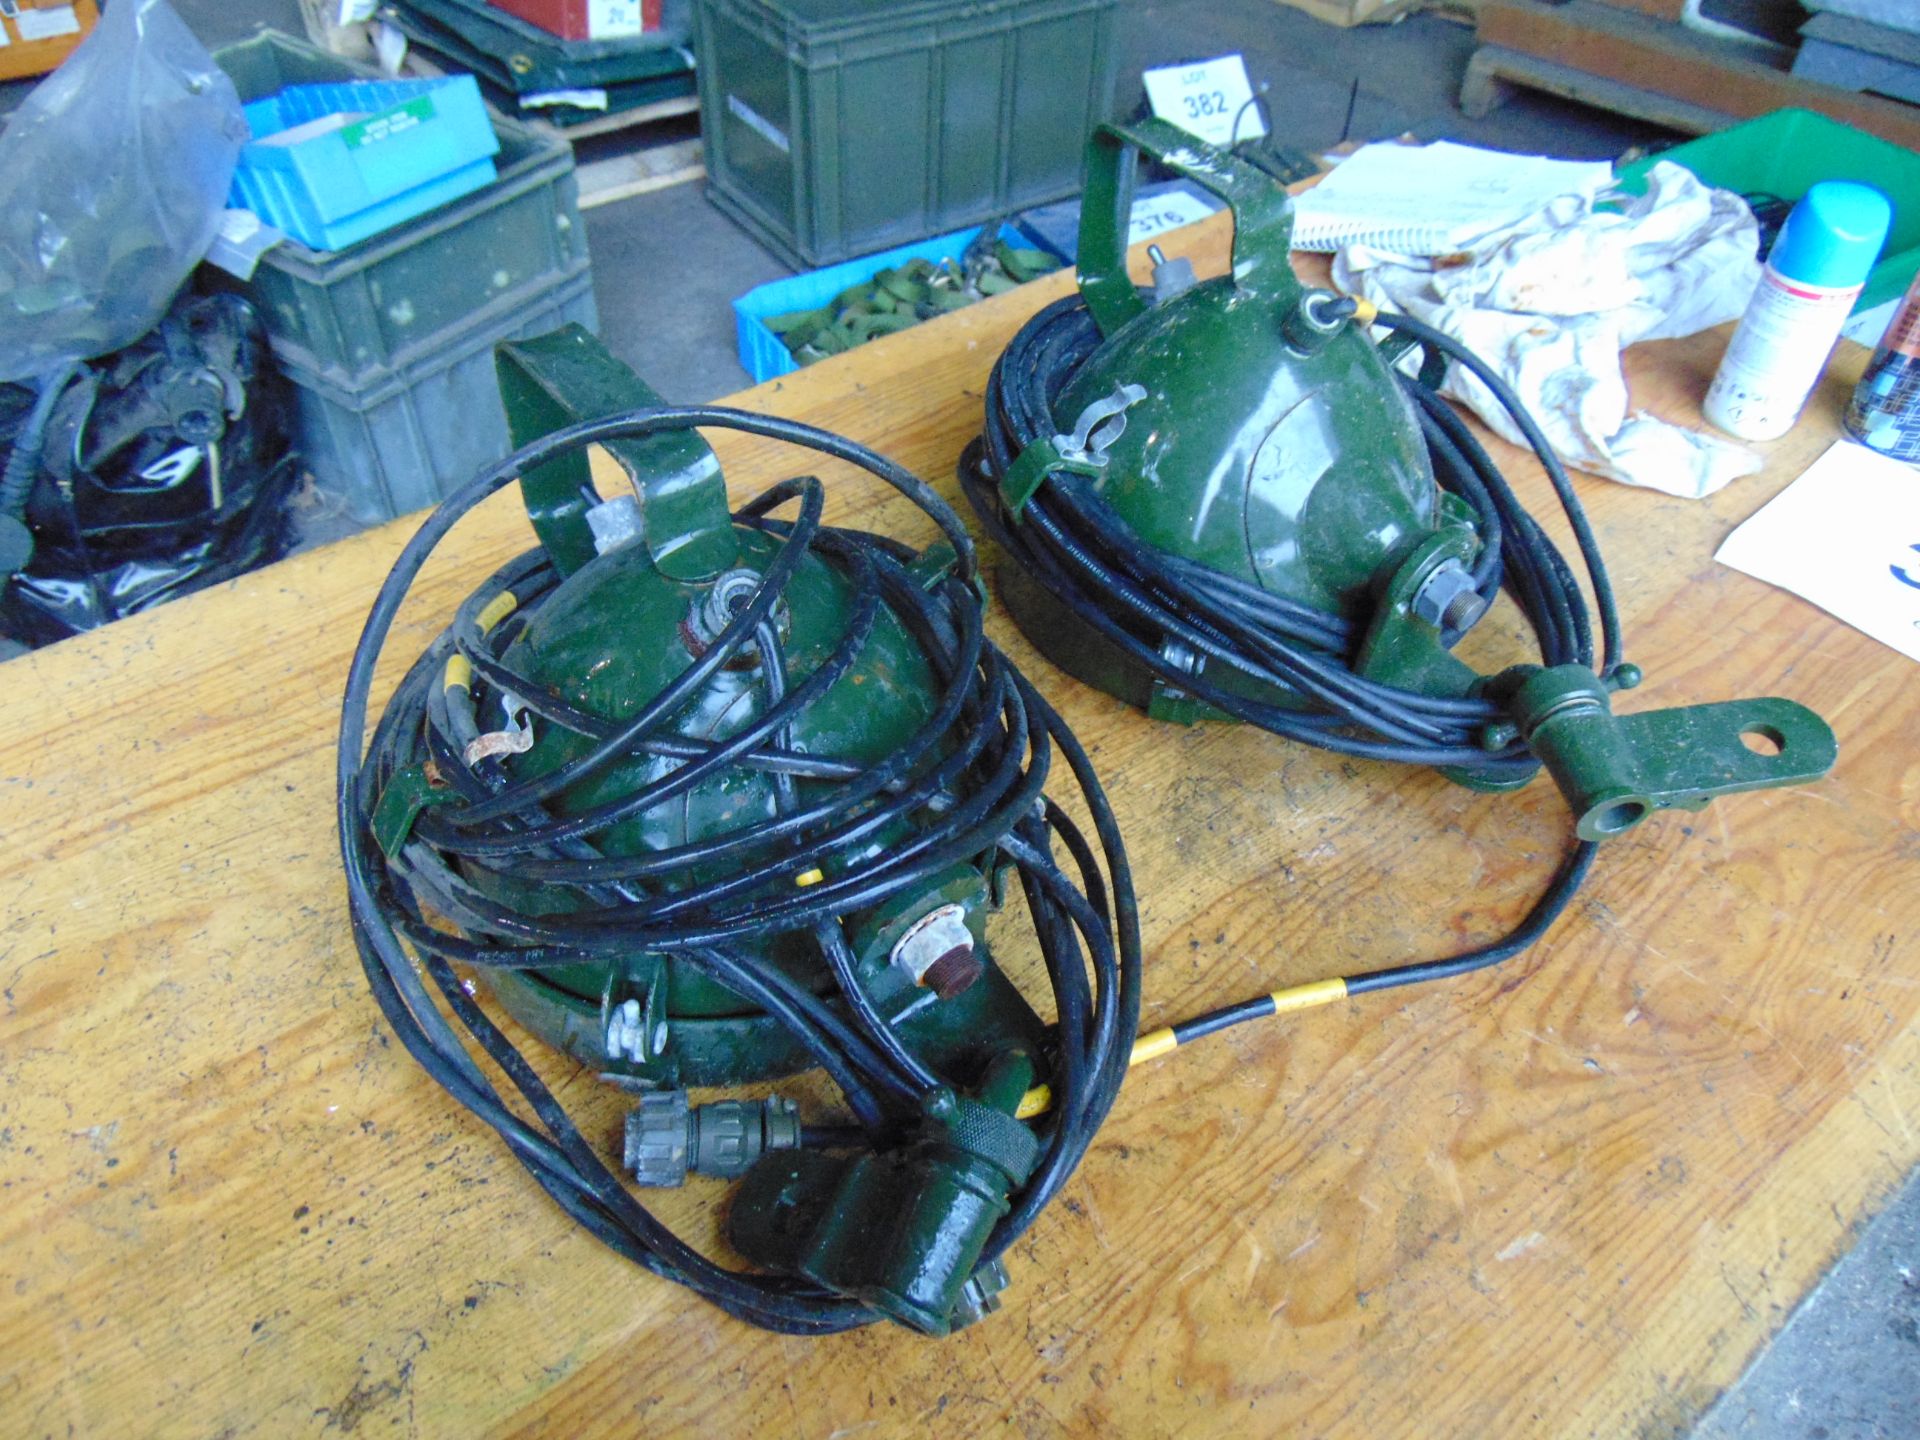 2 x FV159907 Vehicle Spot Lamp c/w Bracket and Leads - Image 3 of 5